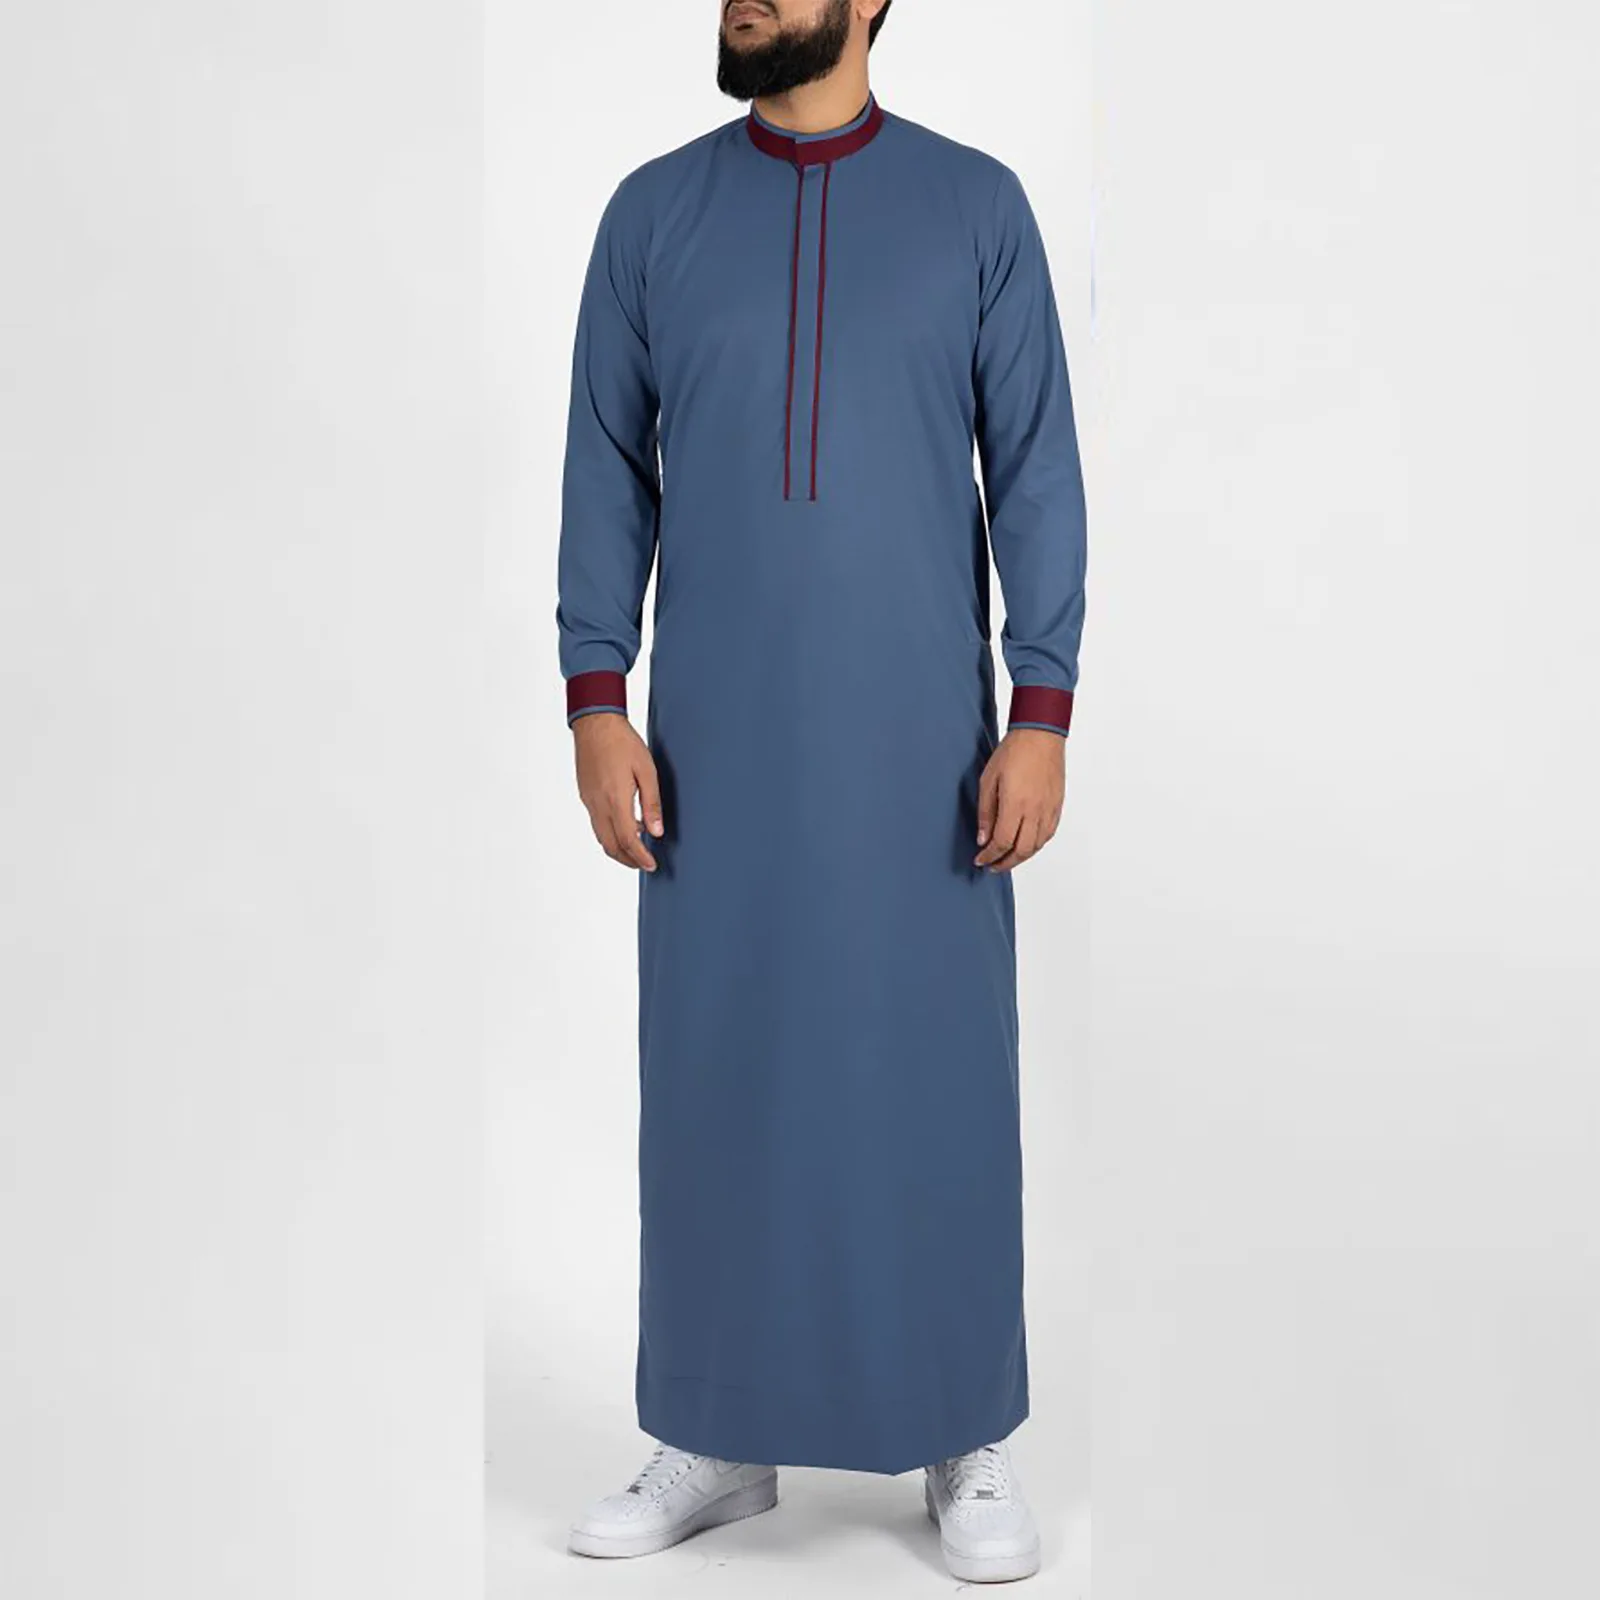 

Islamic Men's Clothing Muslim Solid Color Djellaba Business Robe New Arab Man Ethnic Style Long Sleeve Shirts Casual solid color